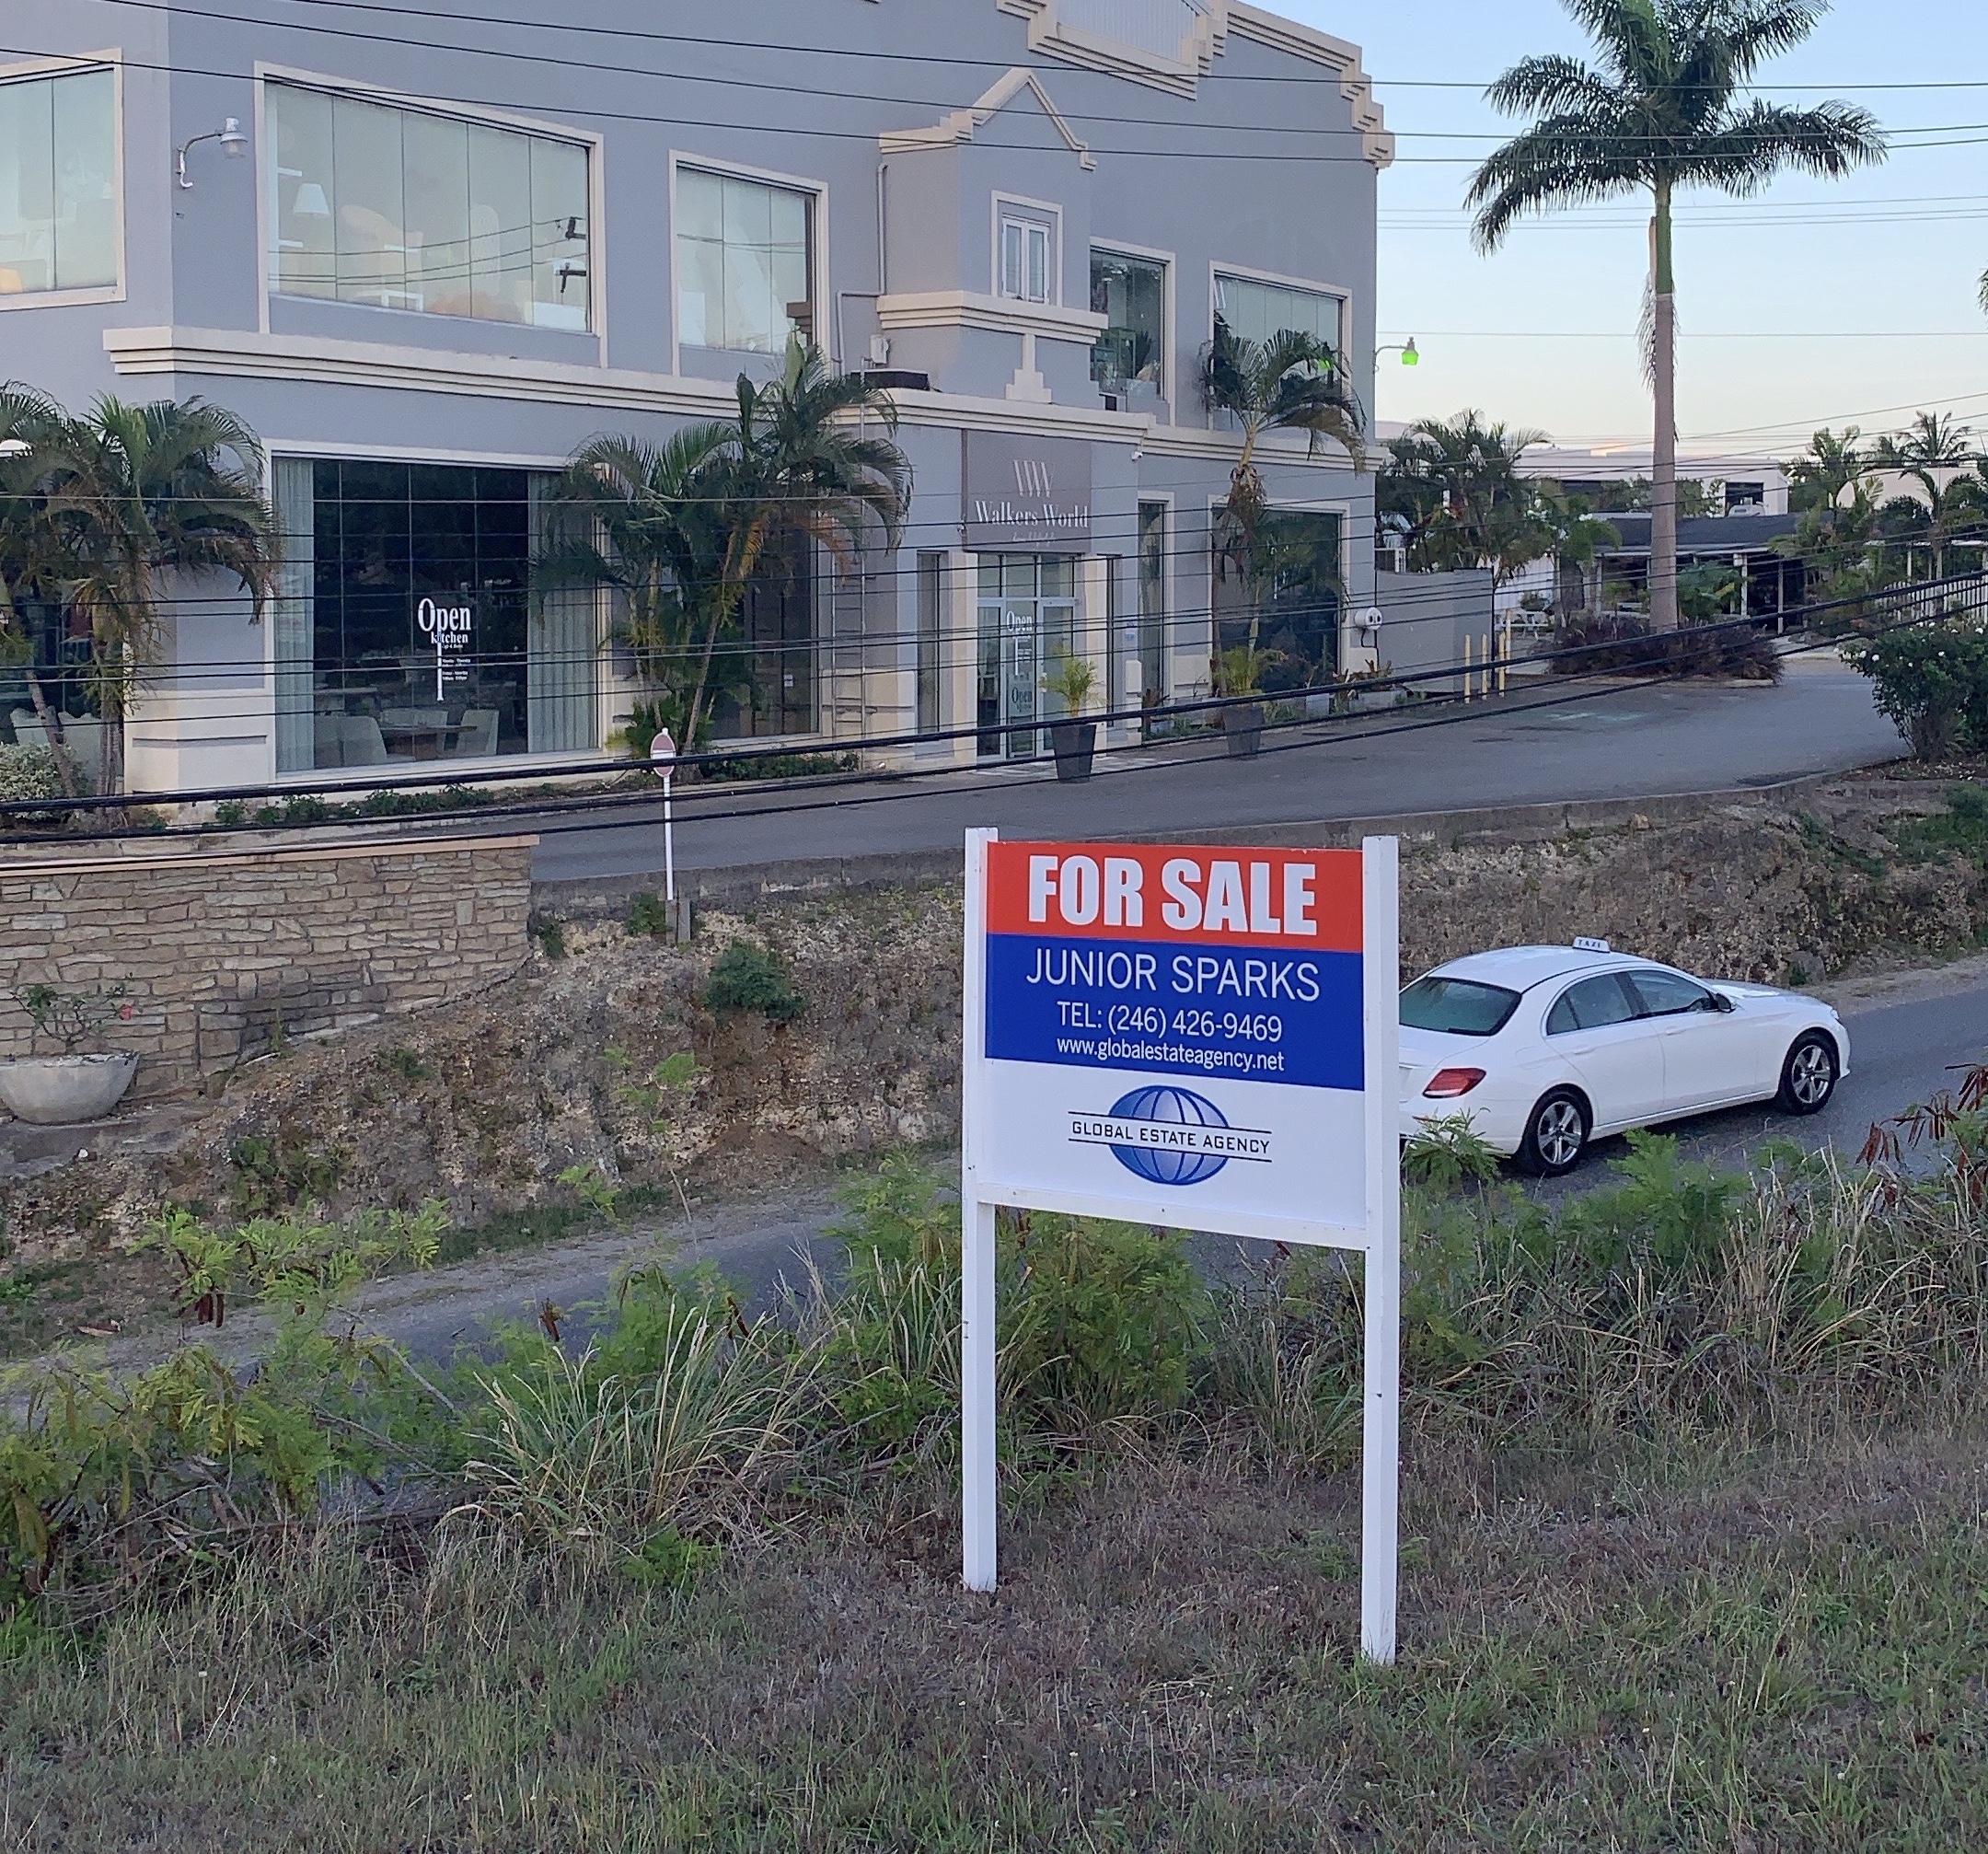 5-Steps-to-Buying-Vacant-Land-in-Barbados1.jpg